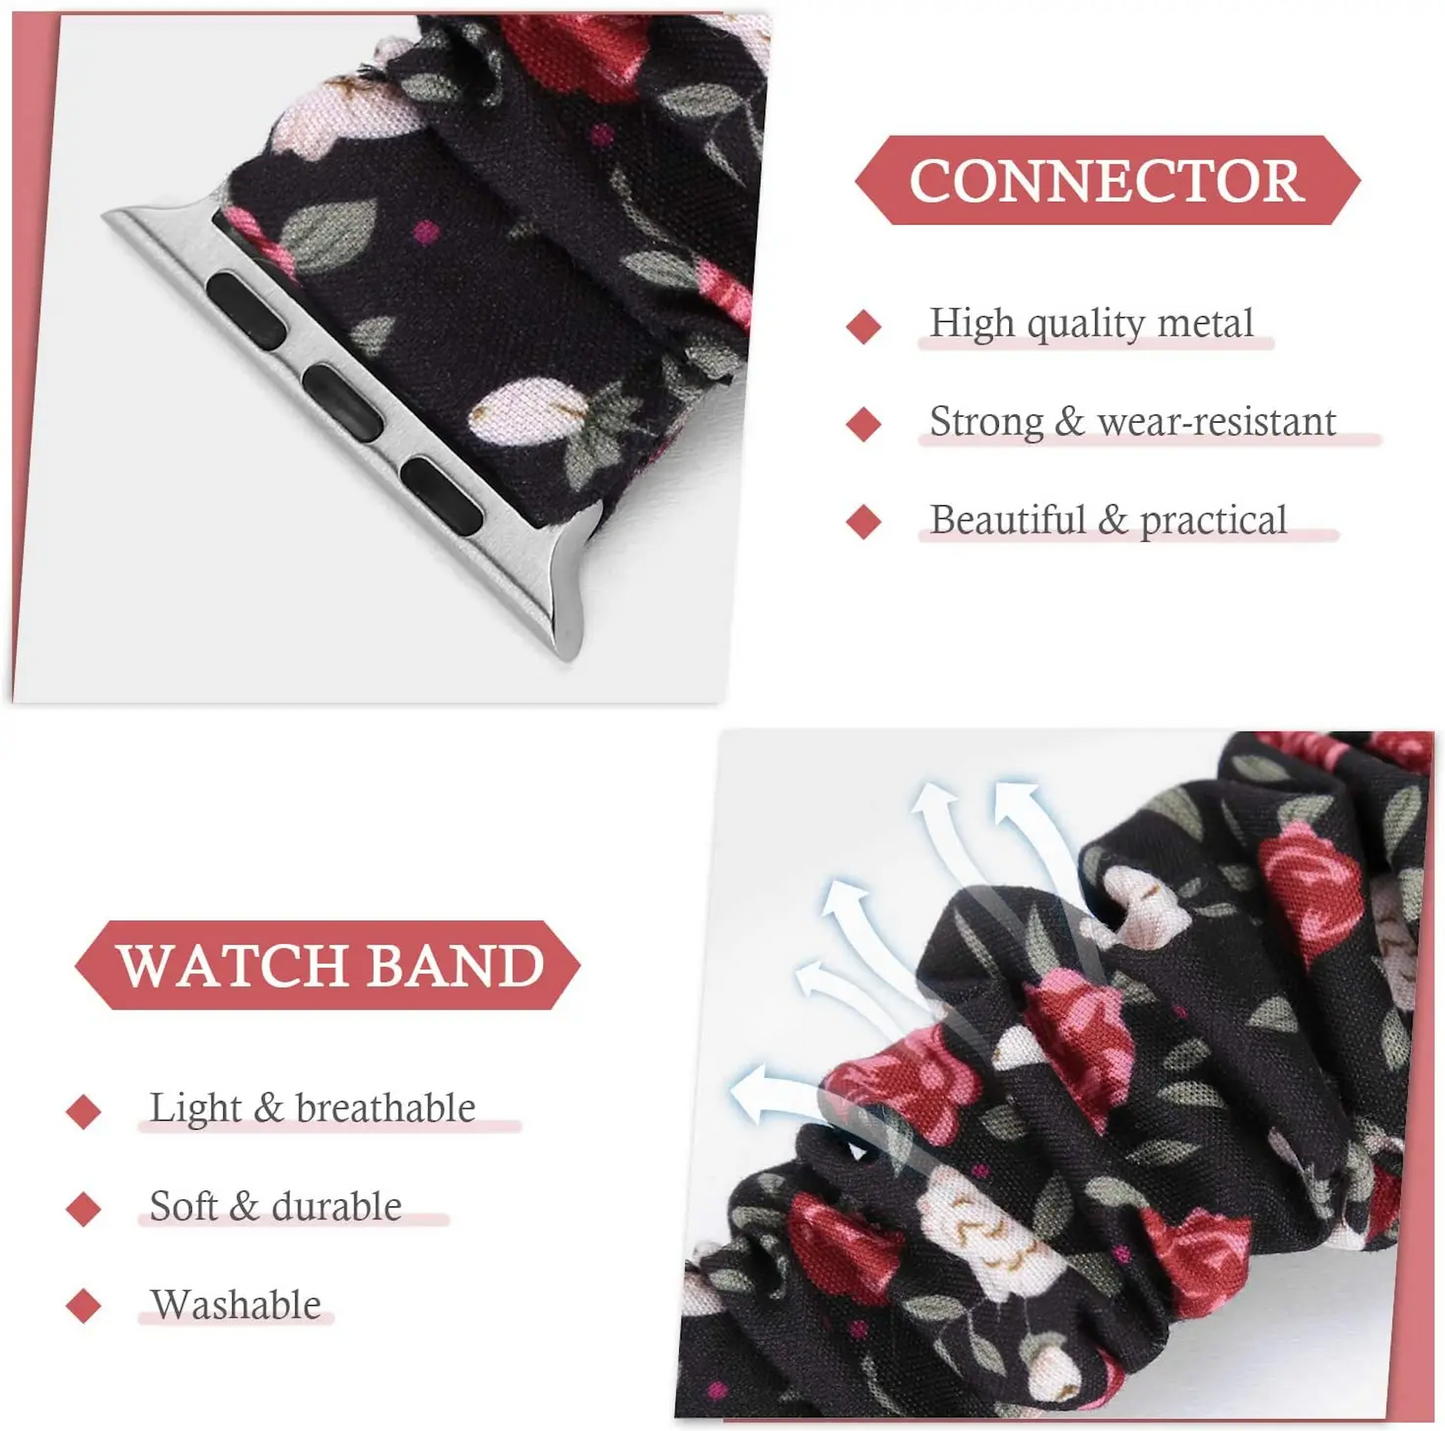 Scrunchie Strap for Apple Watch Island Vibes